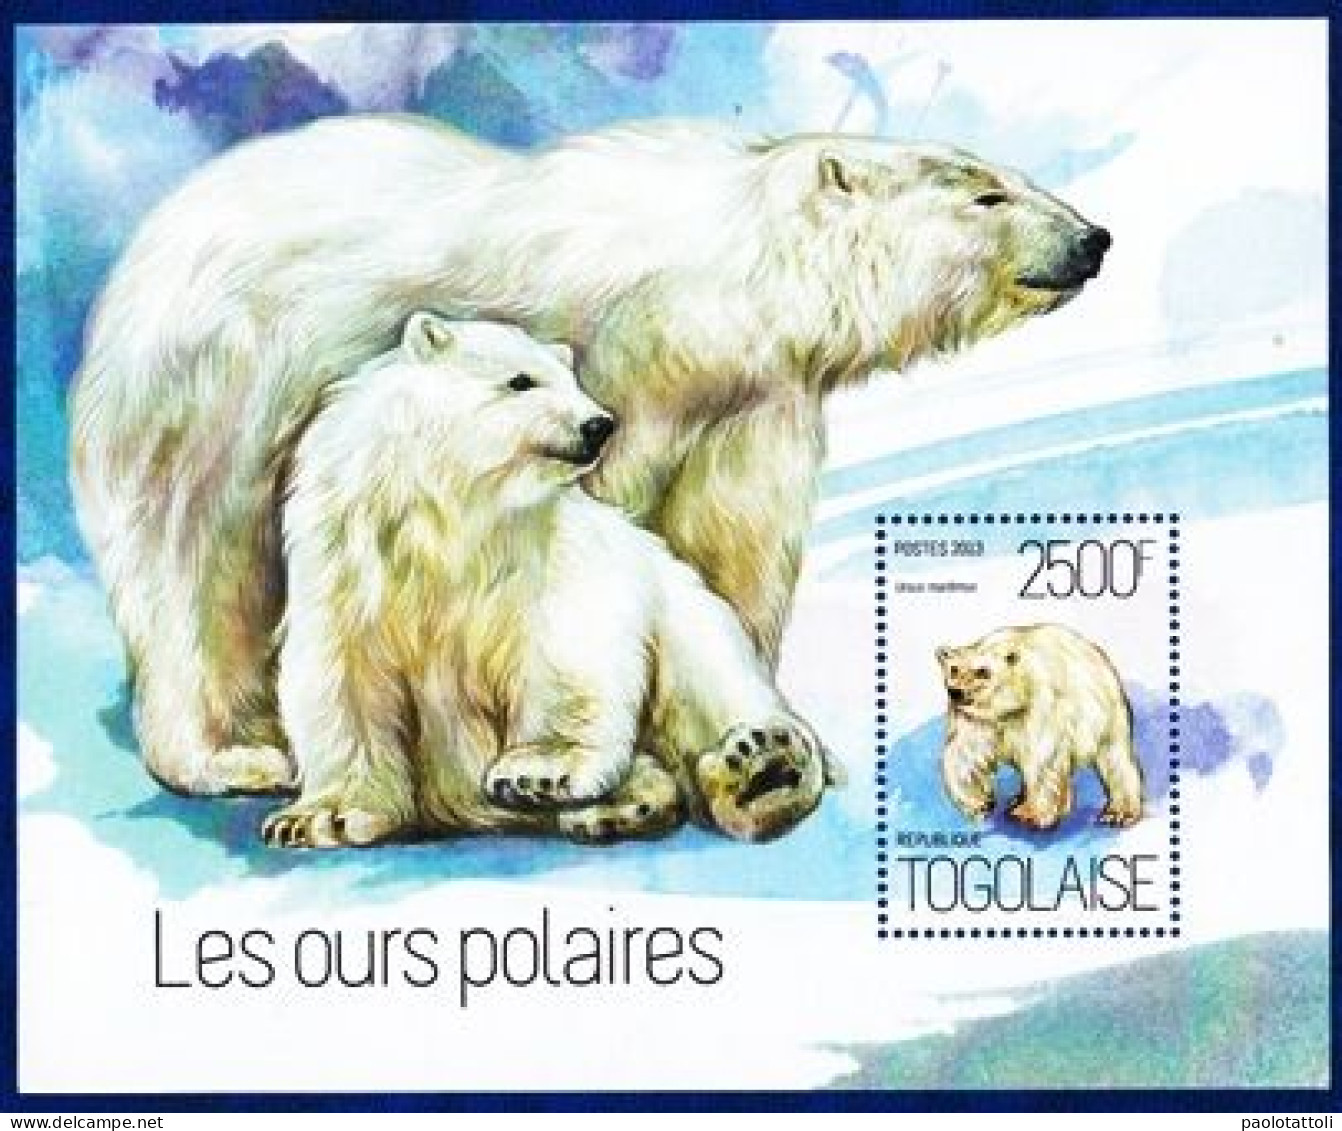 Togo, 2013- Les Ours Polaires-2500F- Block NewNH - Beren